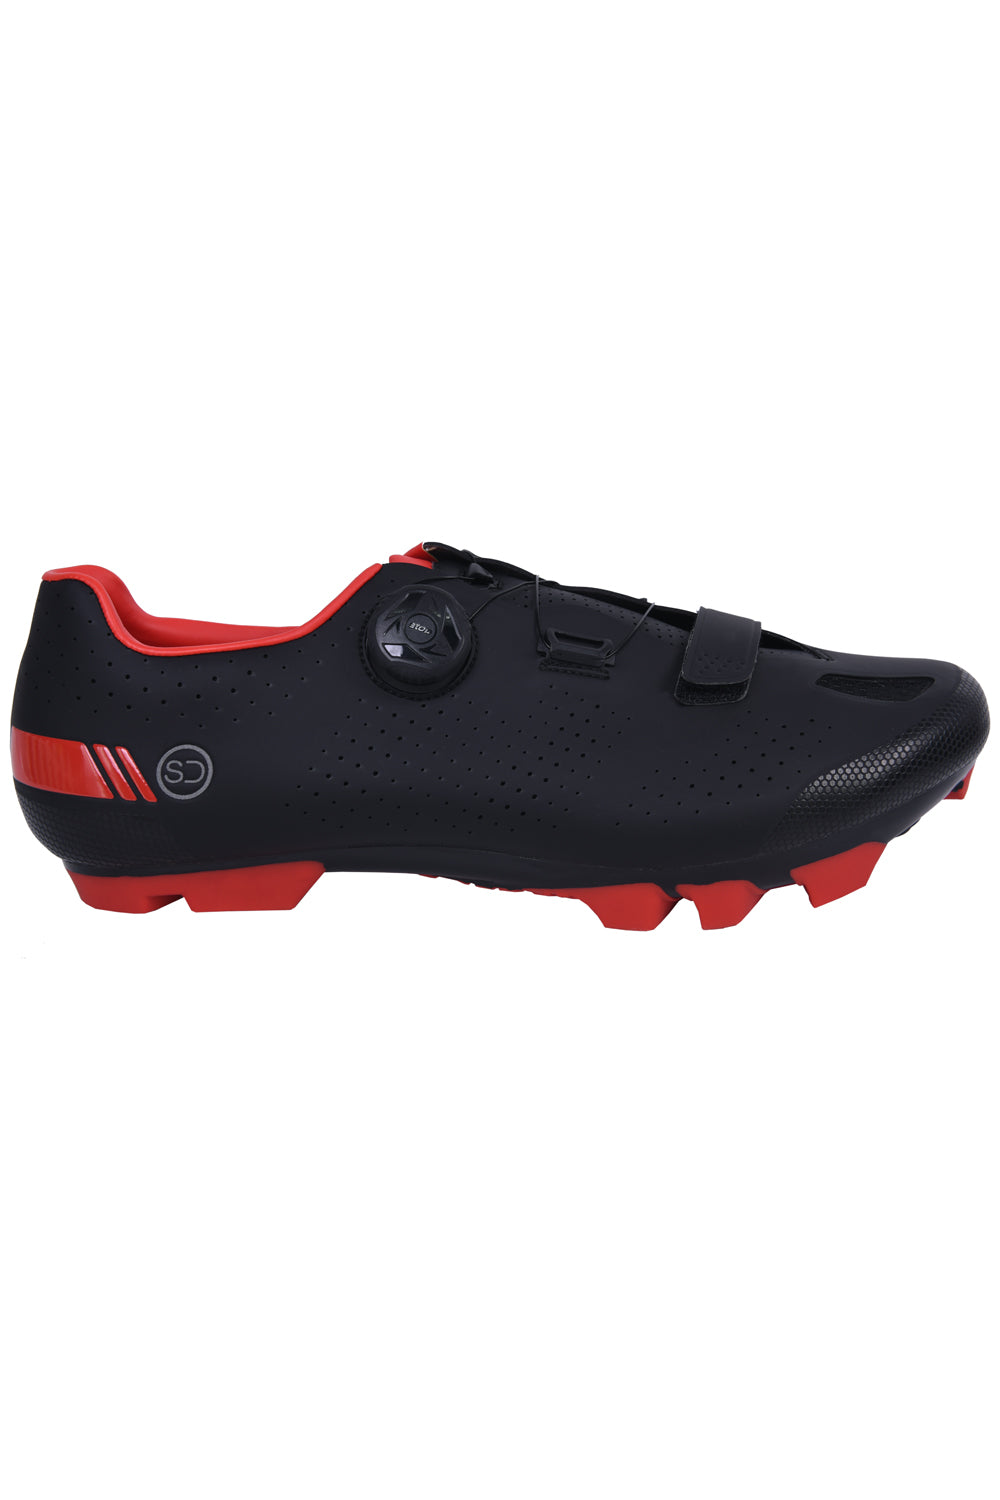 Sundried S-M1 Pro MTB Cycle Shoes Cycle Shoes 38 Red SD0370 38 Red Activewear